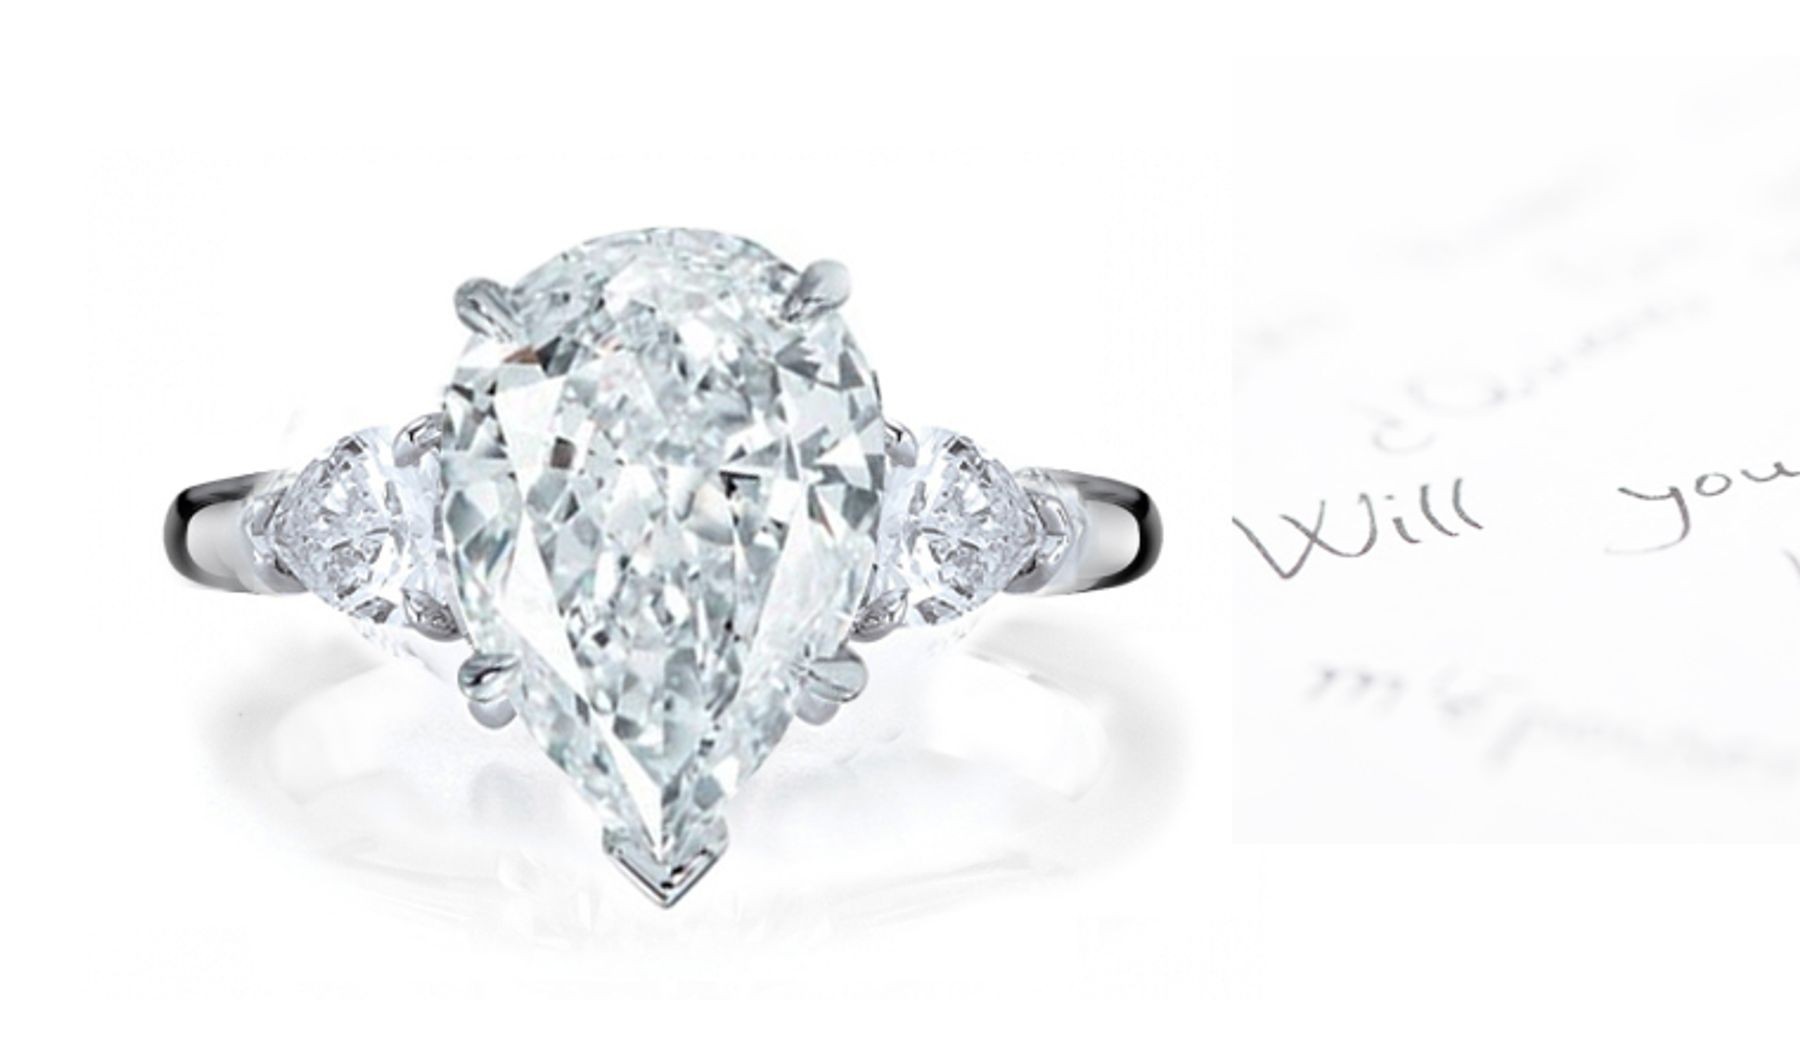 Center Pears & Side Pears Diamonds Three Stone Ring